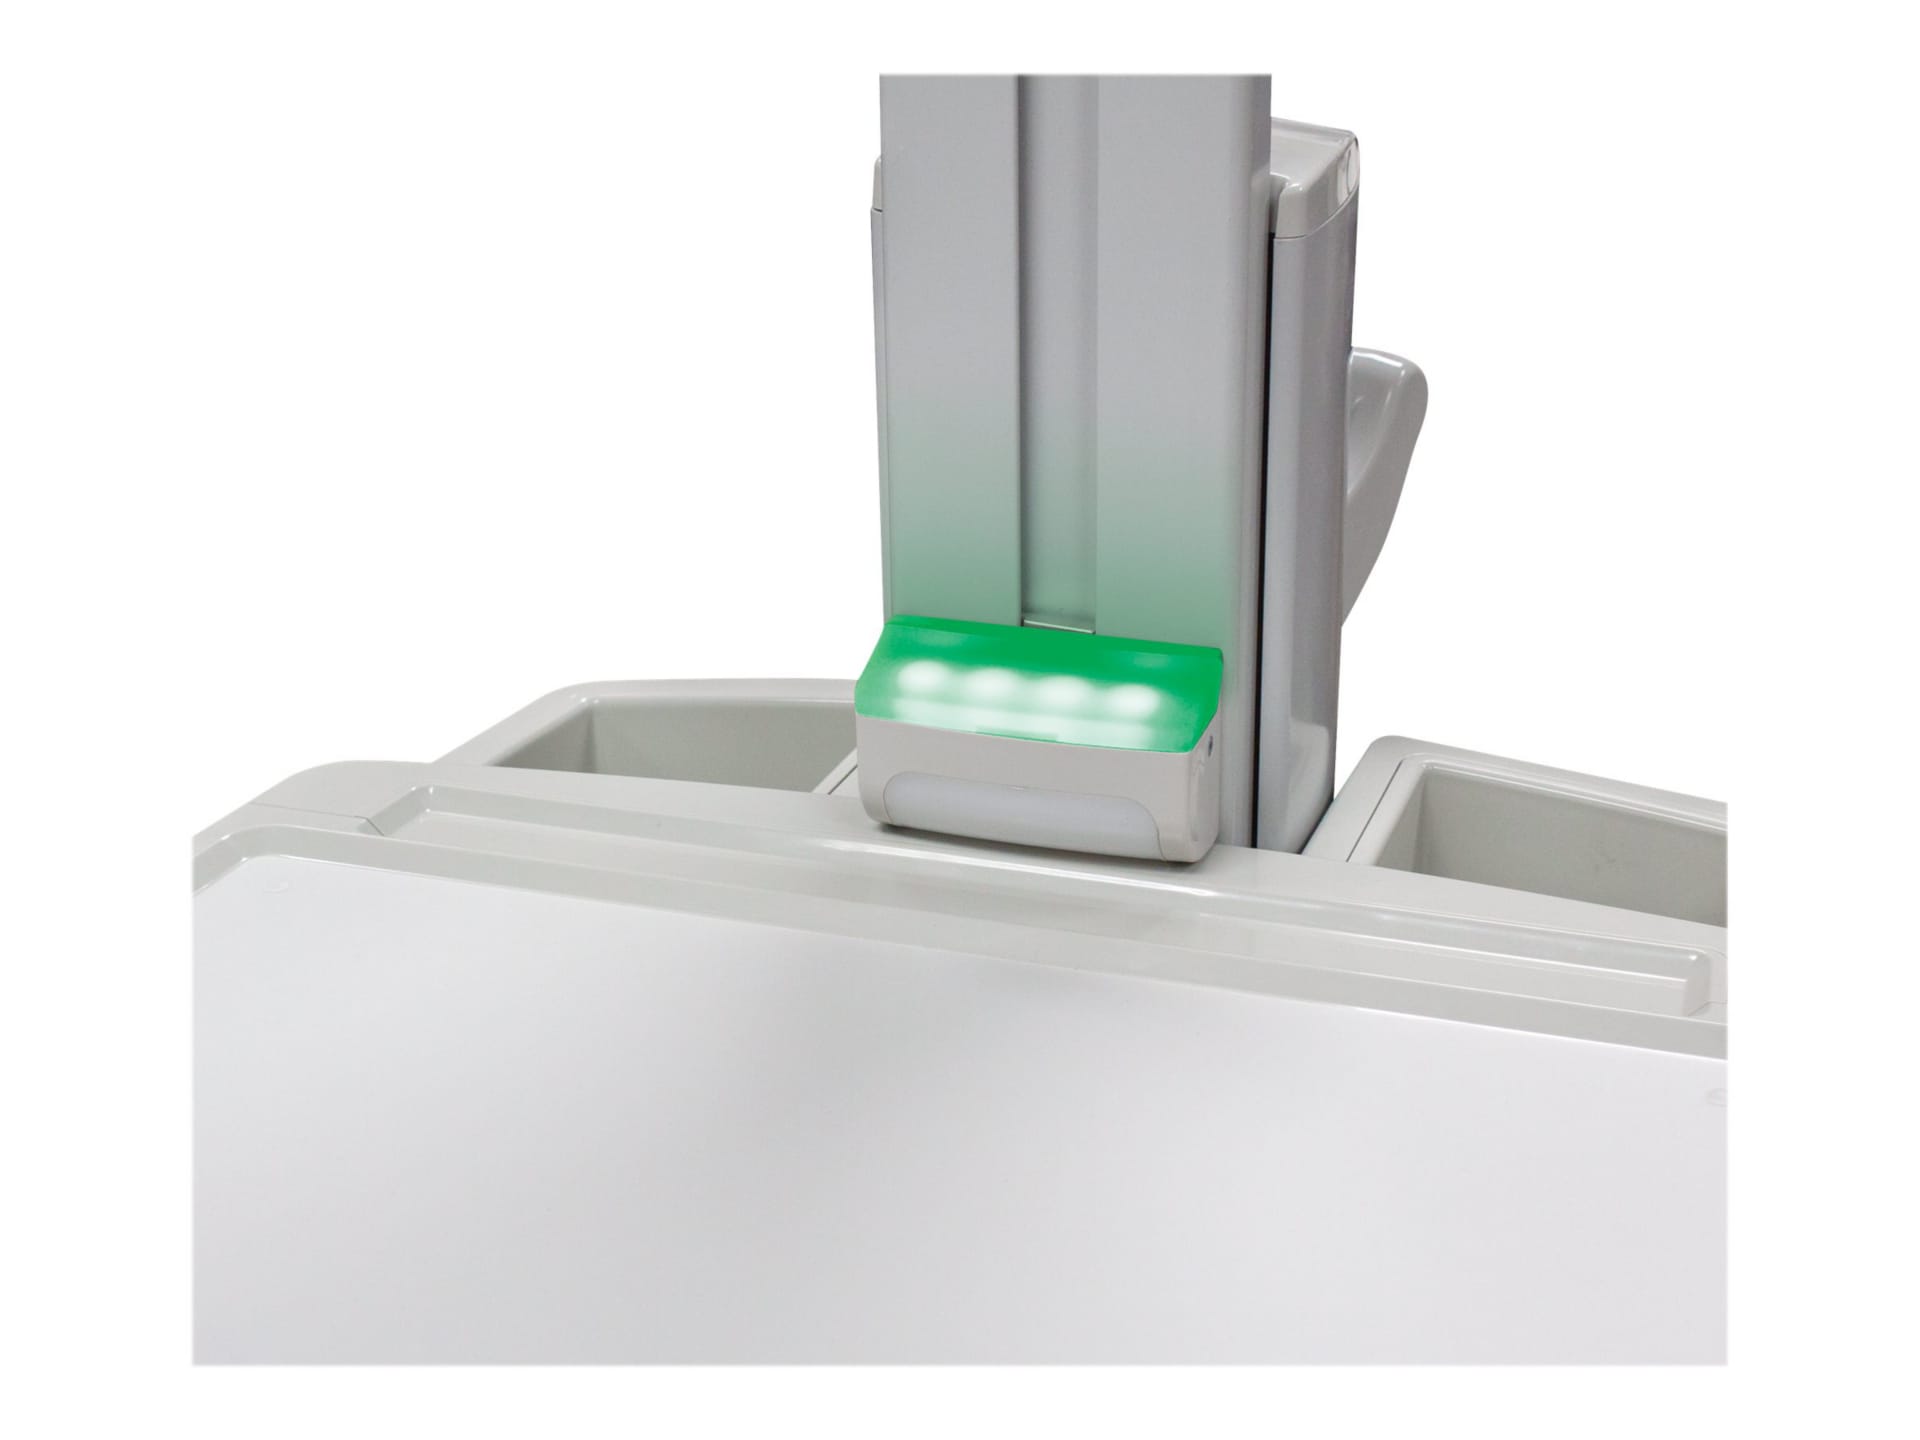 Capsa Healthcare Trio Work Surface Notification Light - mounting component